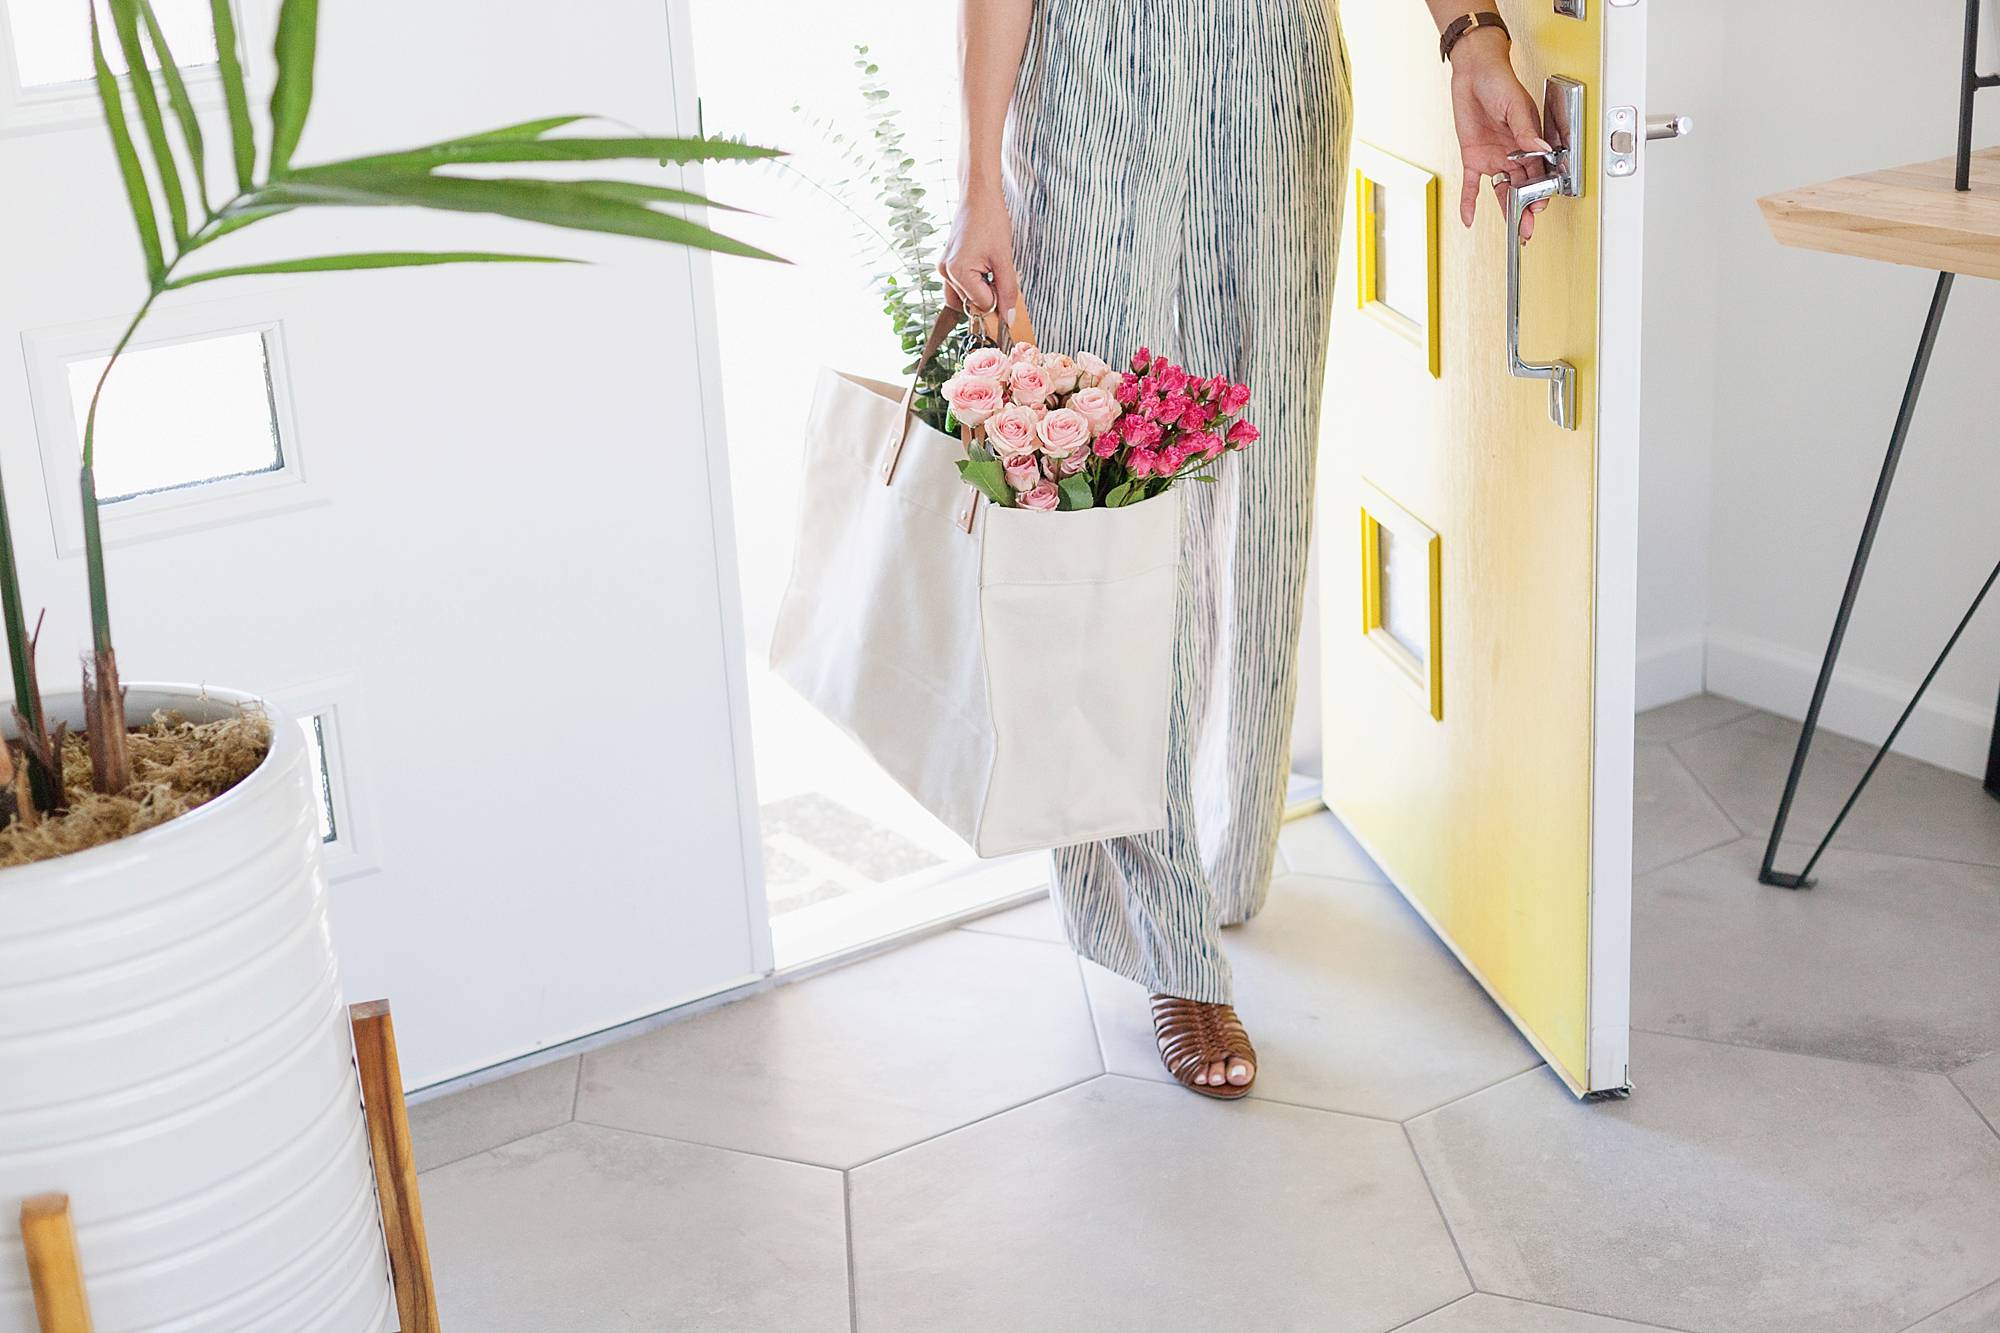 Diana Holding Bag With Flowers